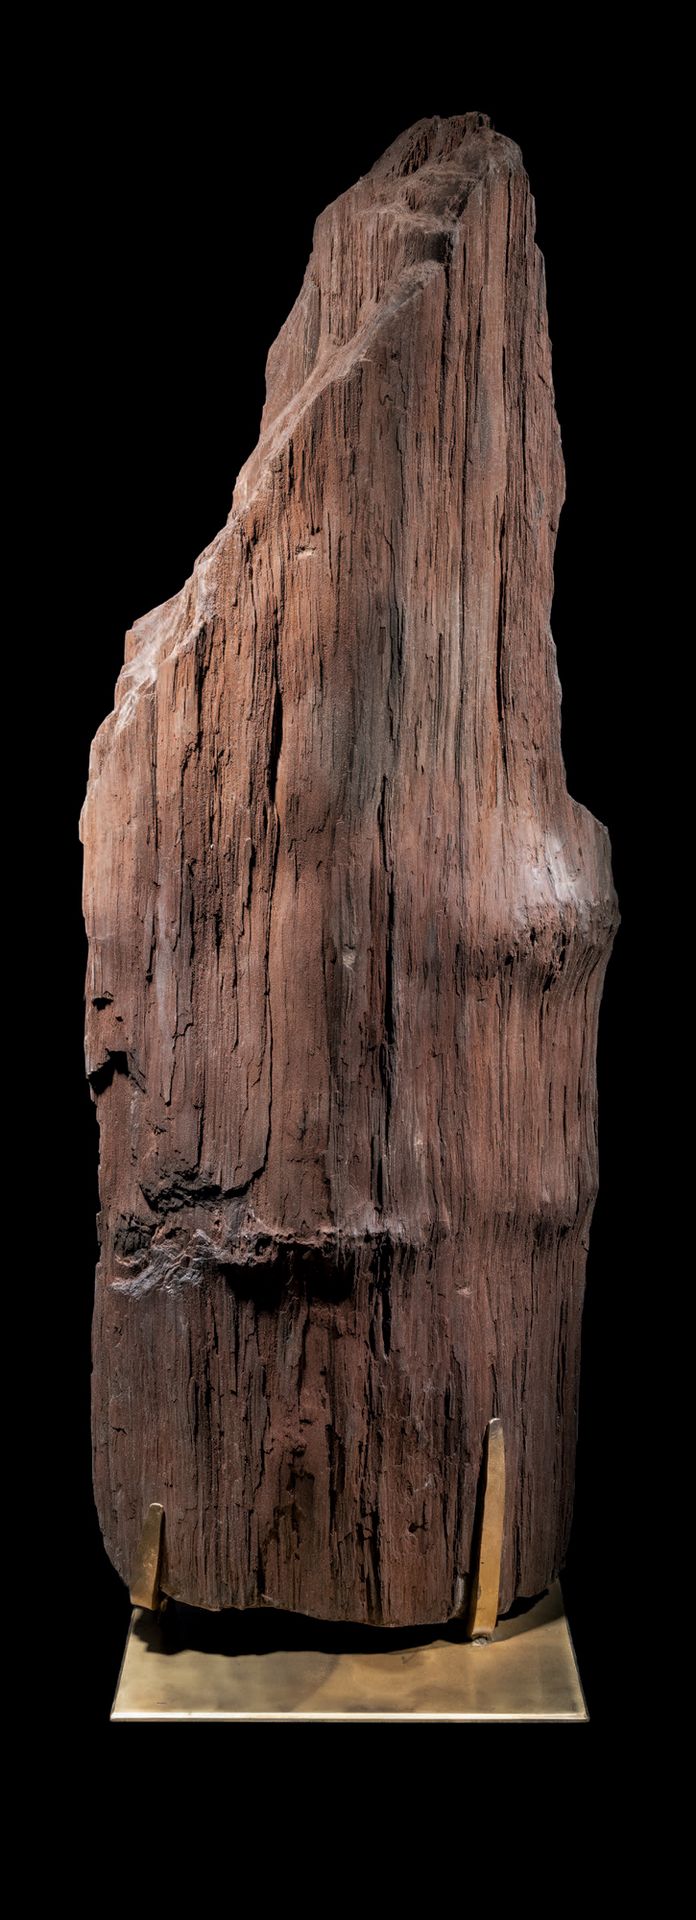 Null CRYSTALISED FOSSILE TRUNK
H. 115 cm - W. 38 cm - D. 30 cm - Weight: 87kg
来自&hellip;